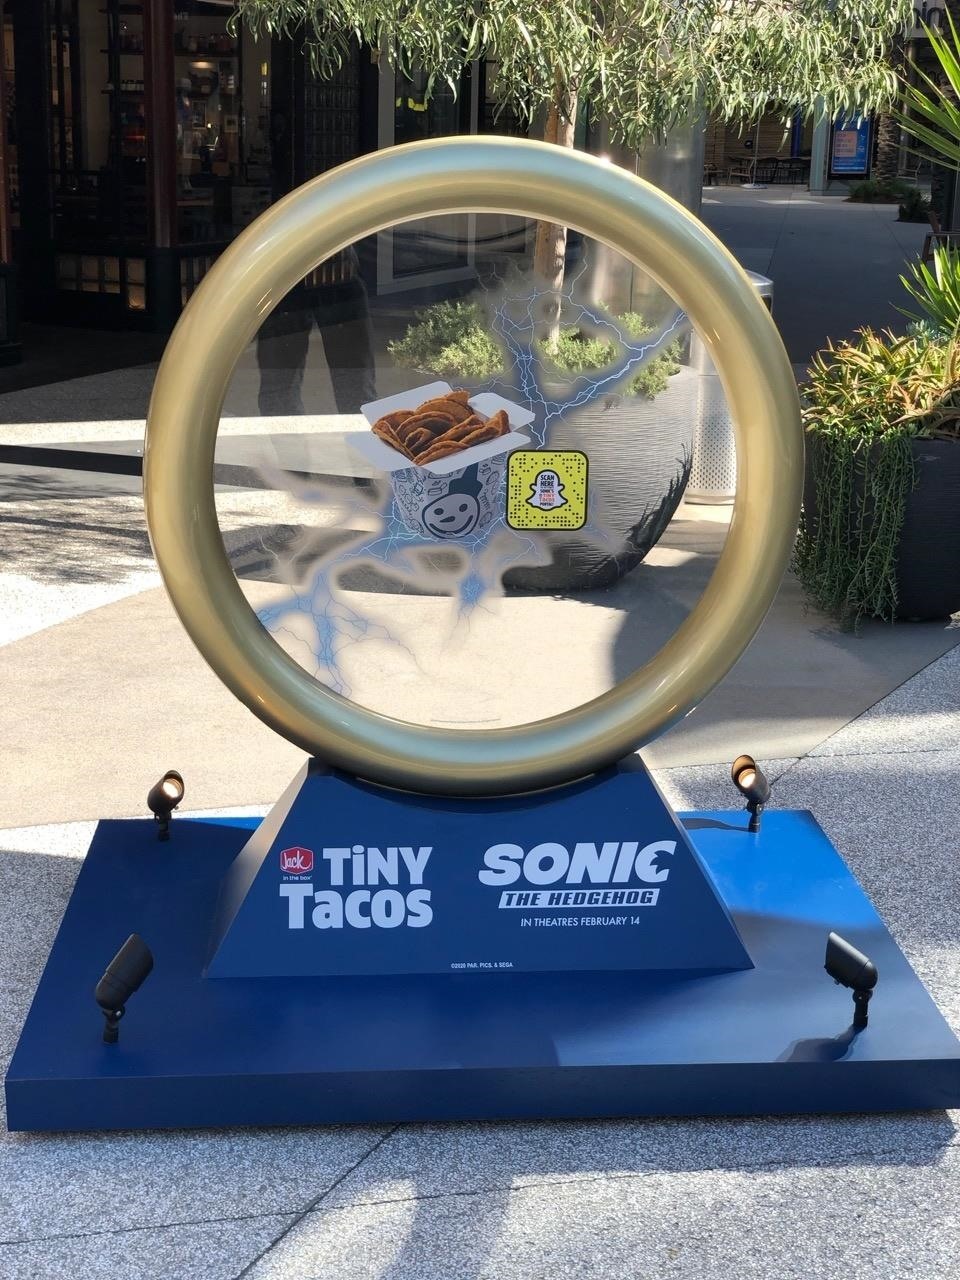 Jack in the Box Partners with Paramount to Promote 'Sonic the Hedgehog' Movie with Snapchat AR